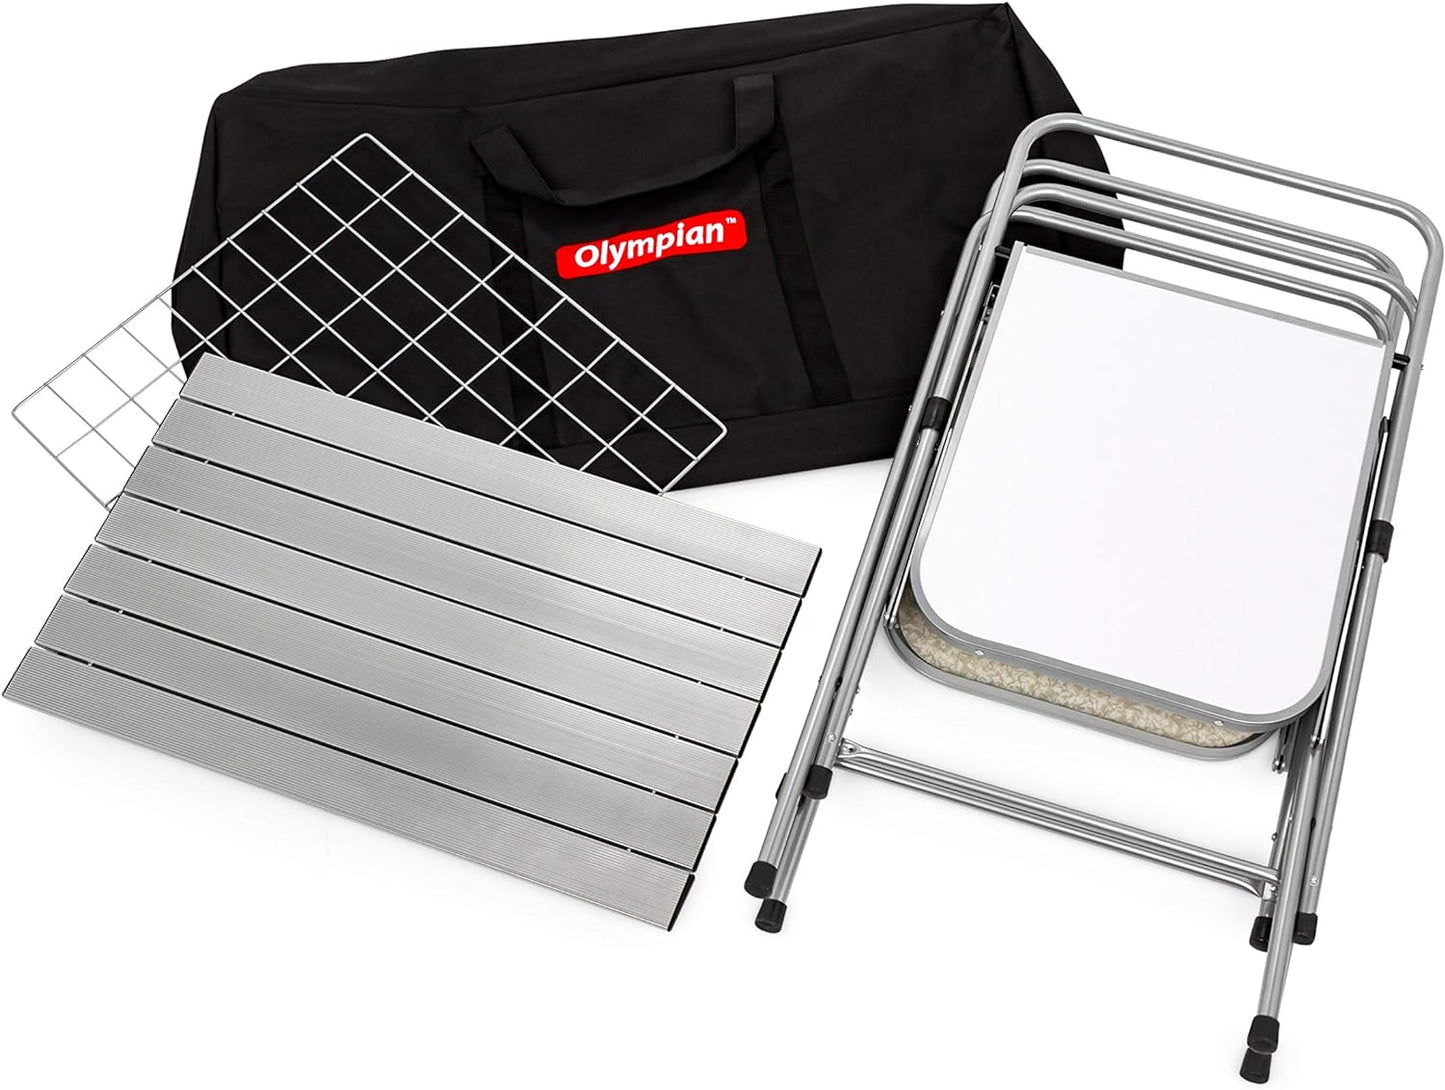 Camco Olympian Deluxe Portable Grill Table | Provides Plenty of Room for Grilling Gear | Ideal for Picnics, Camping, Boating, Tailgating, and Backyard BBQs | (57293) Silver